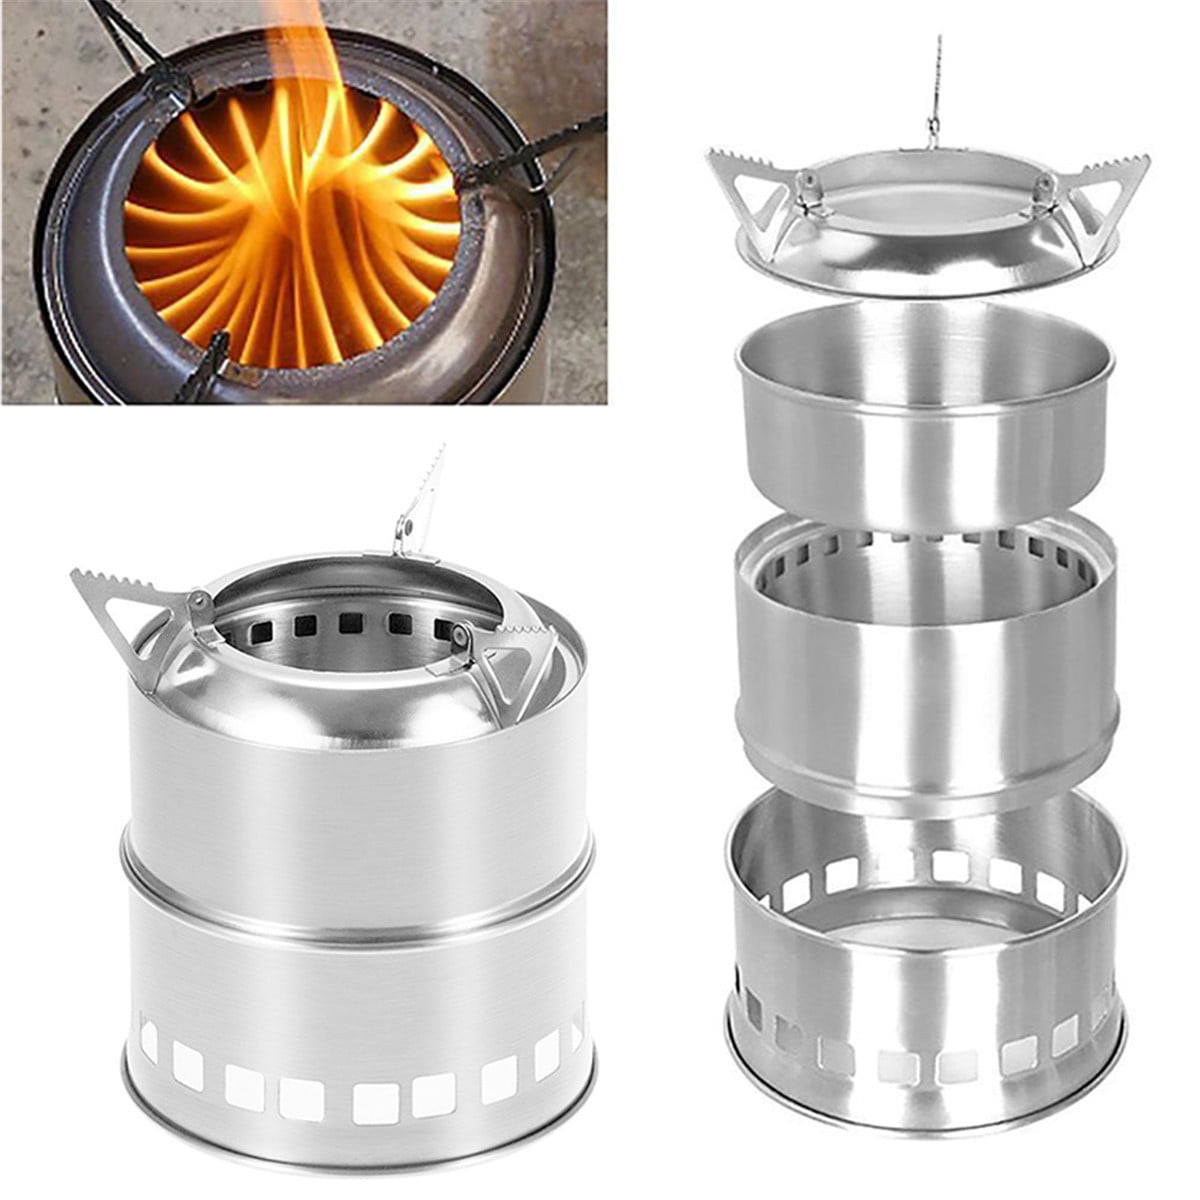 Portable Camping Alcohol Stoves for Outdoors Cooking Backpacking Stove